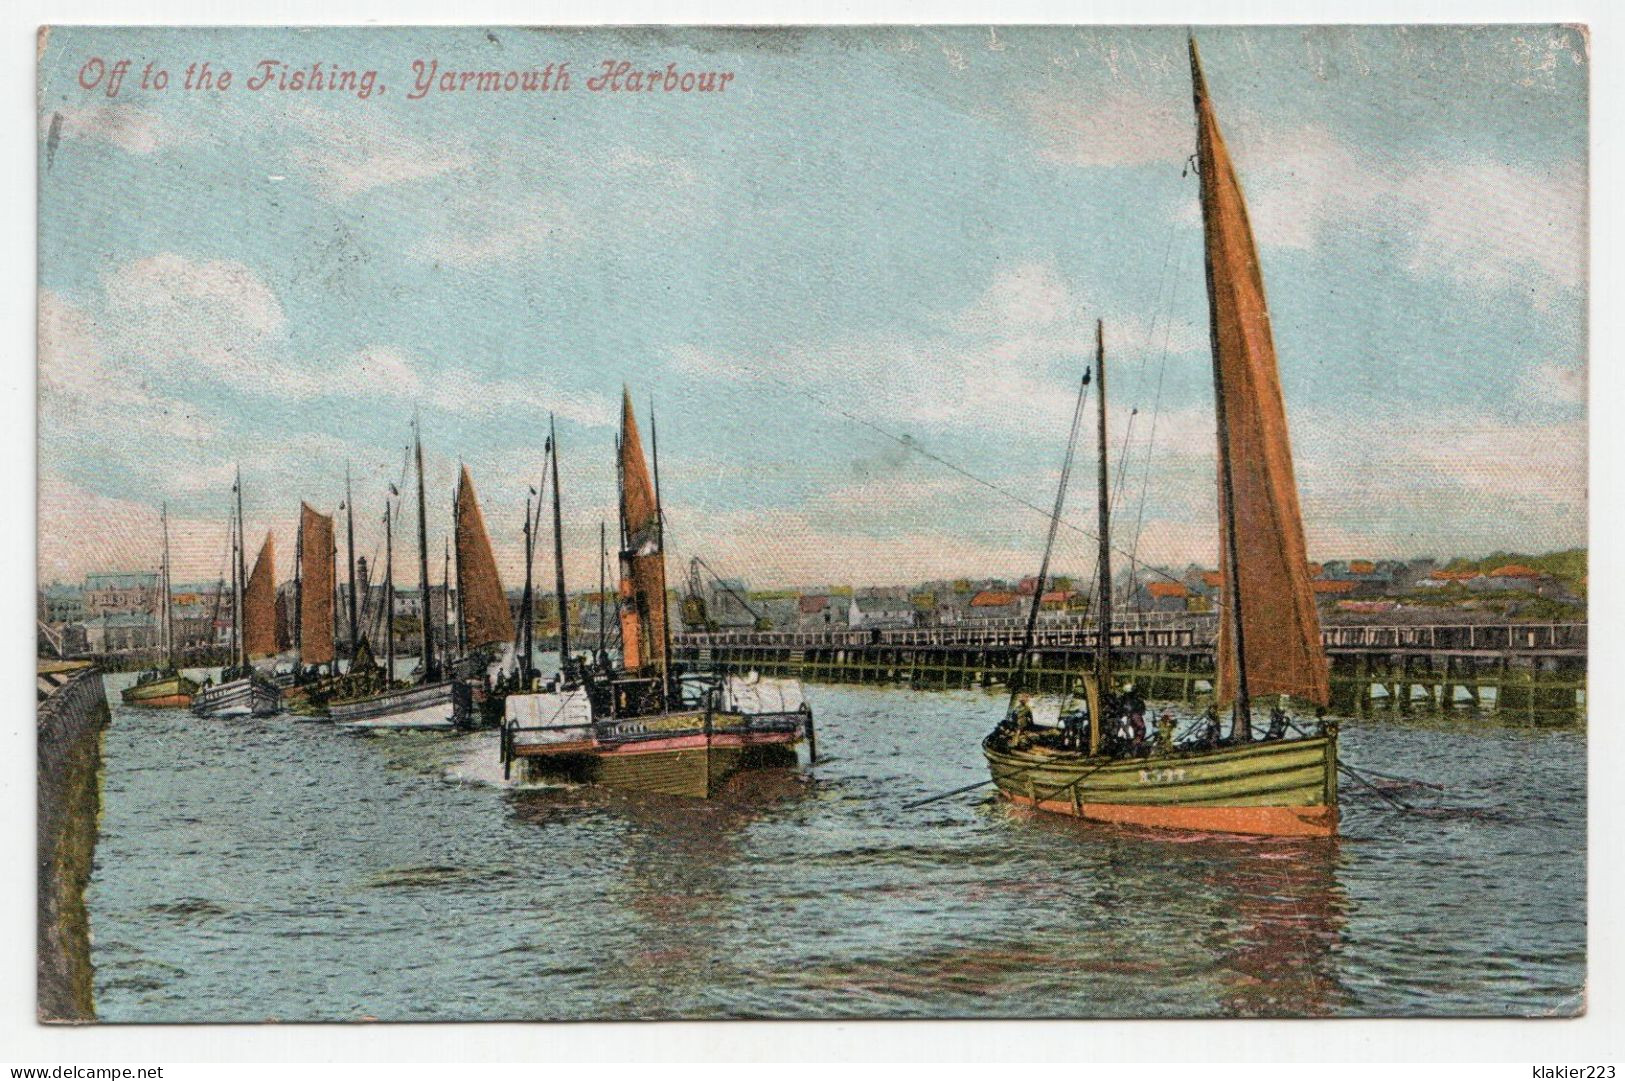 Off To The Fishing, Yarmouth Harbour. - Great Yarmouth